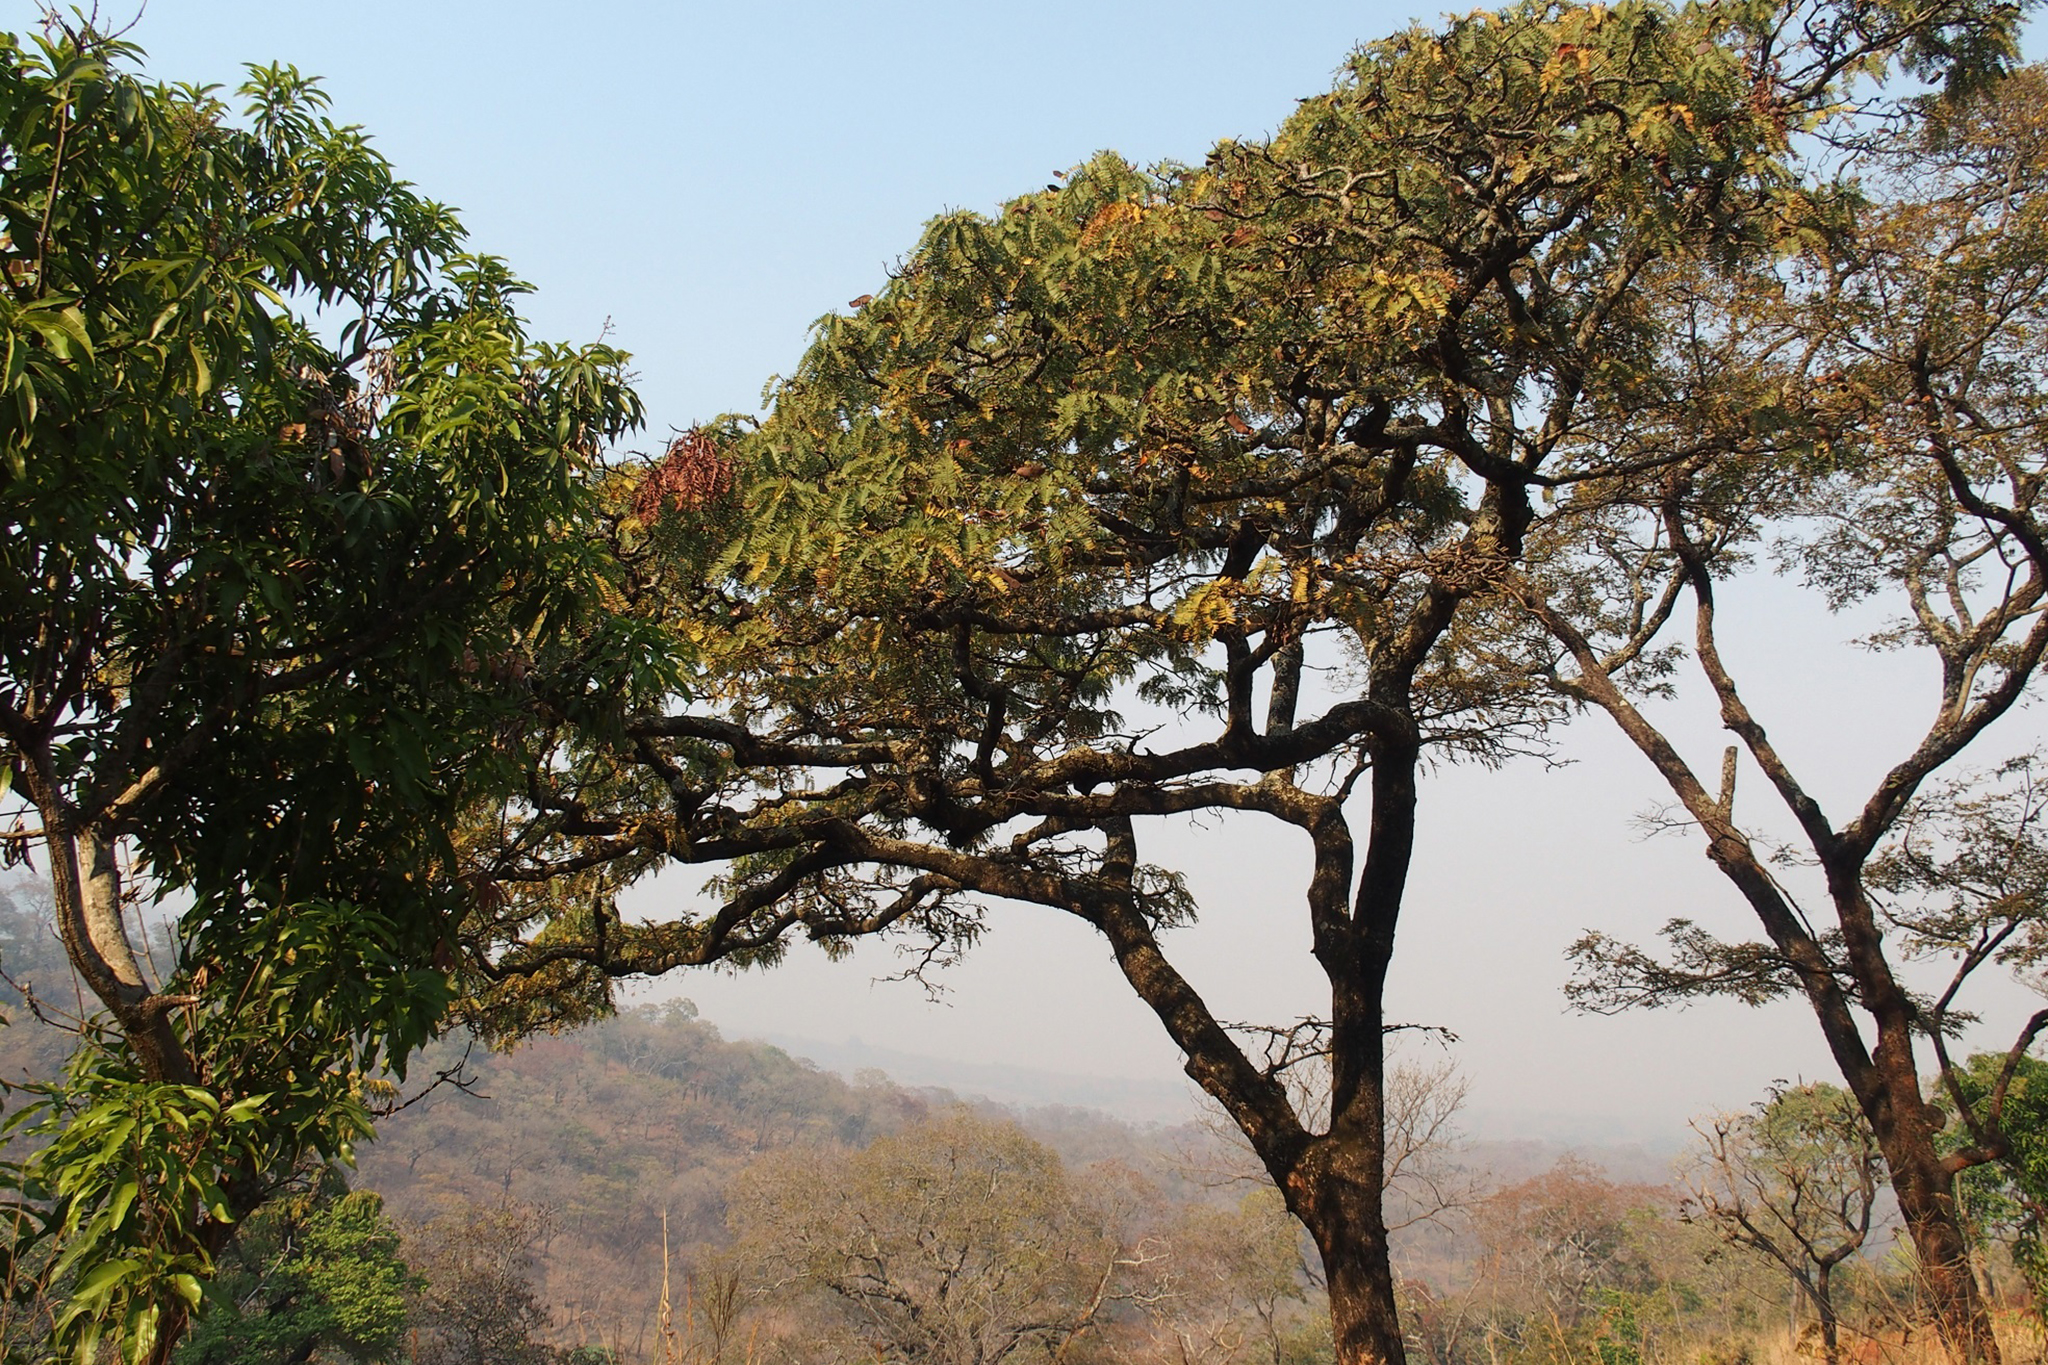 The miombo woodlands are restored with up to 70 tree species typical of the vegetation type, such as Uapaca and Brachystegia trees (pictured). This dominant forest type is able to quickly regenerate from root or seed stock. © Matthias De Beenhouwer, WeForest